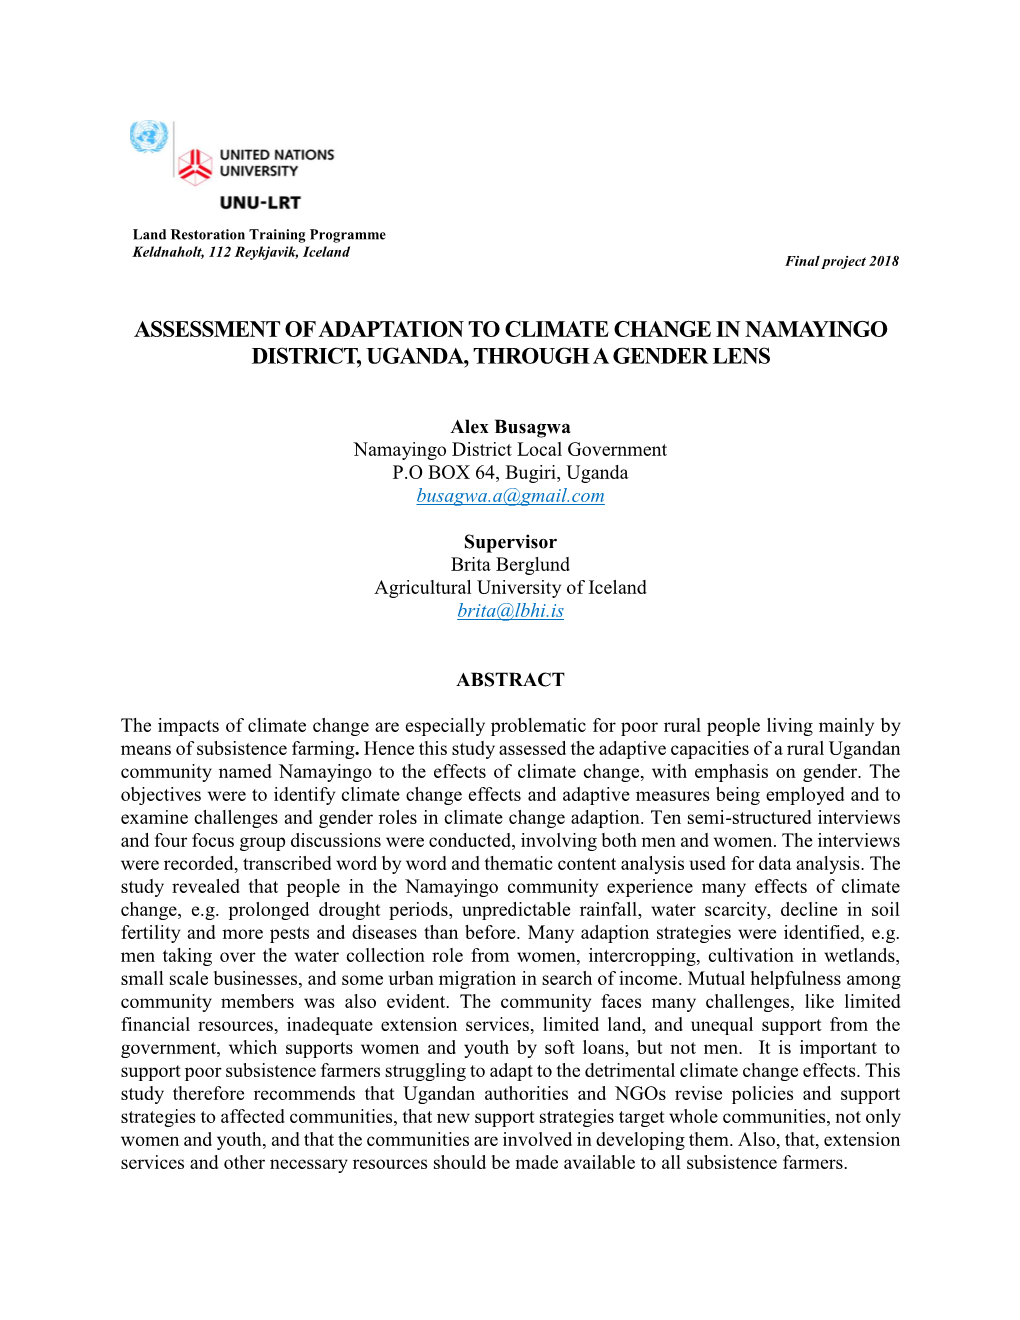 Assessment of Adaptation to Climate Change in Namayingo District, Uganda, Through a Gender Lens